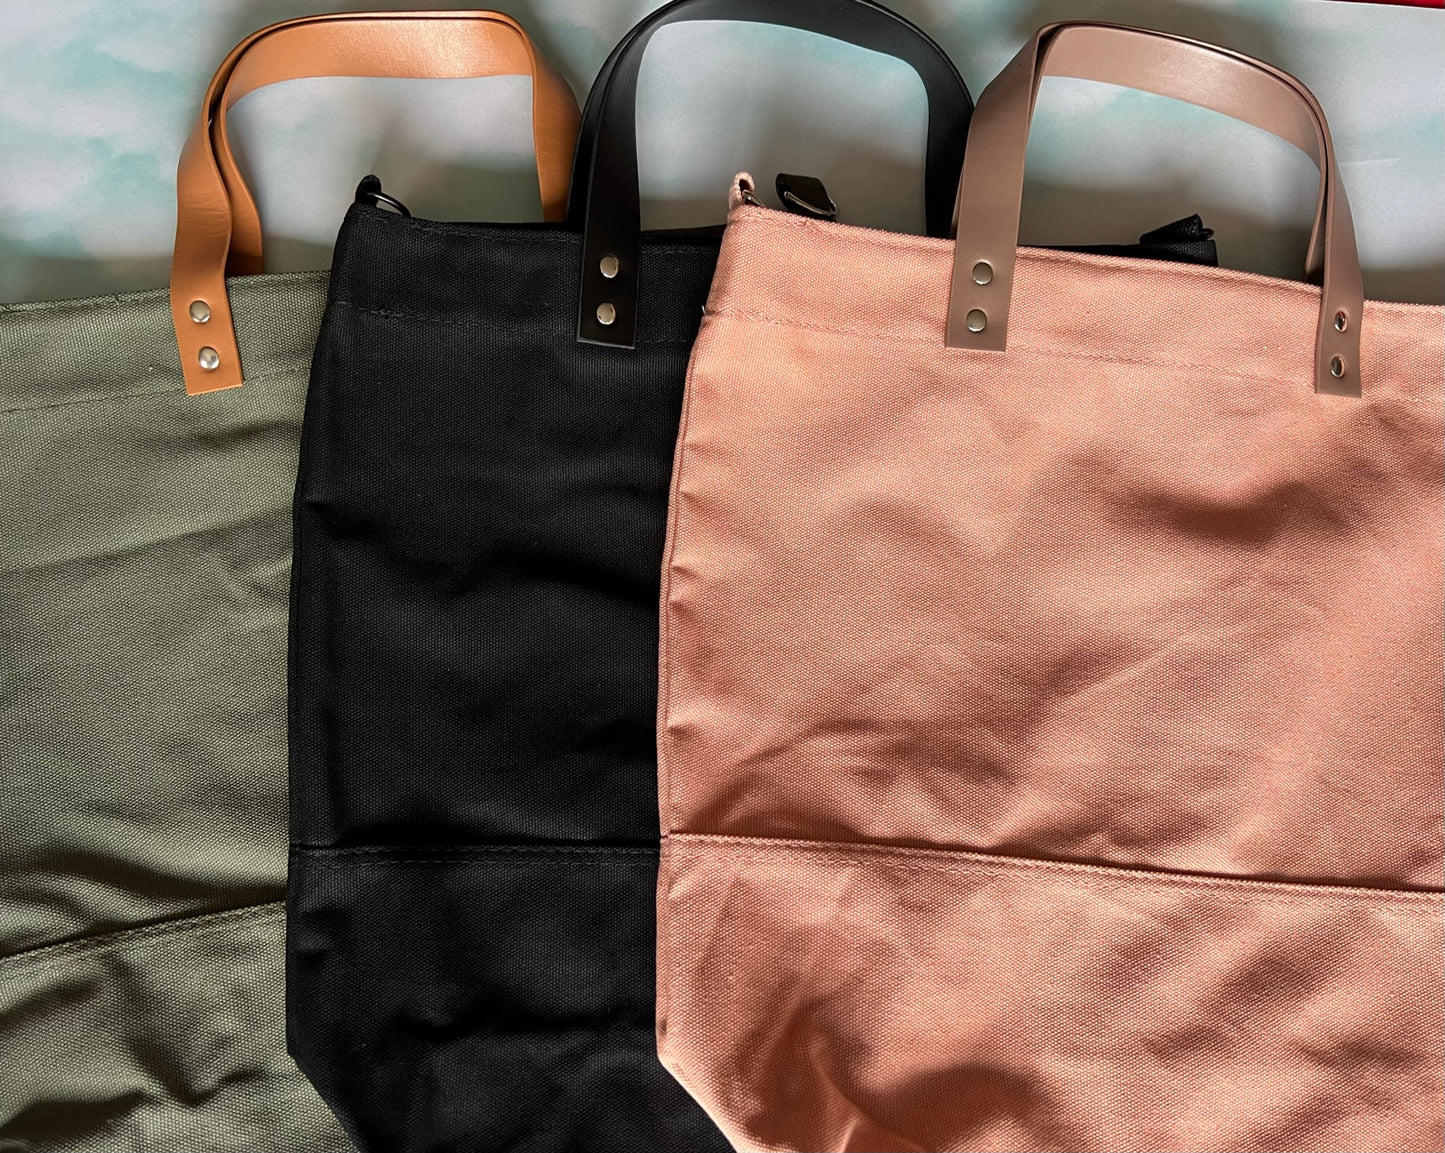 Large Totes with Leather Handles